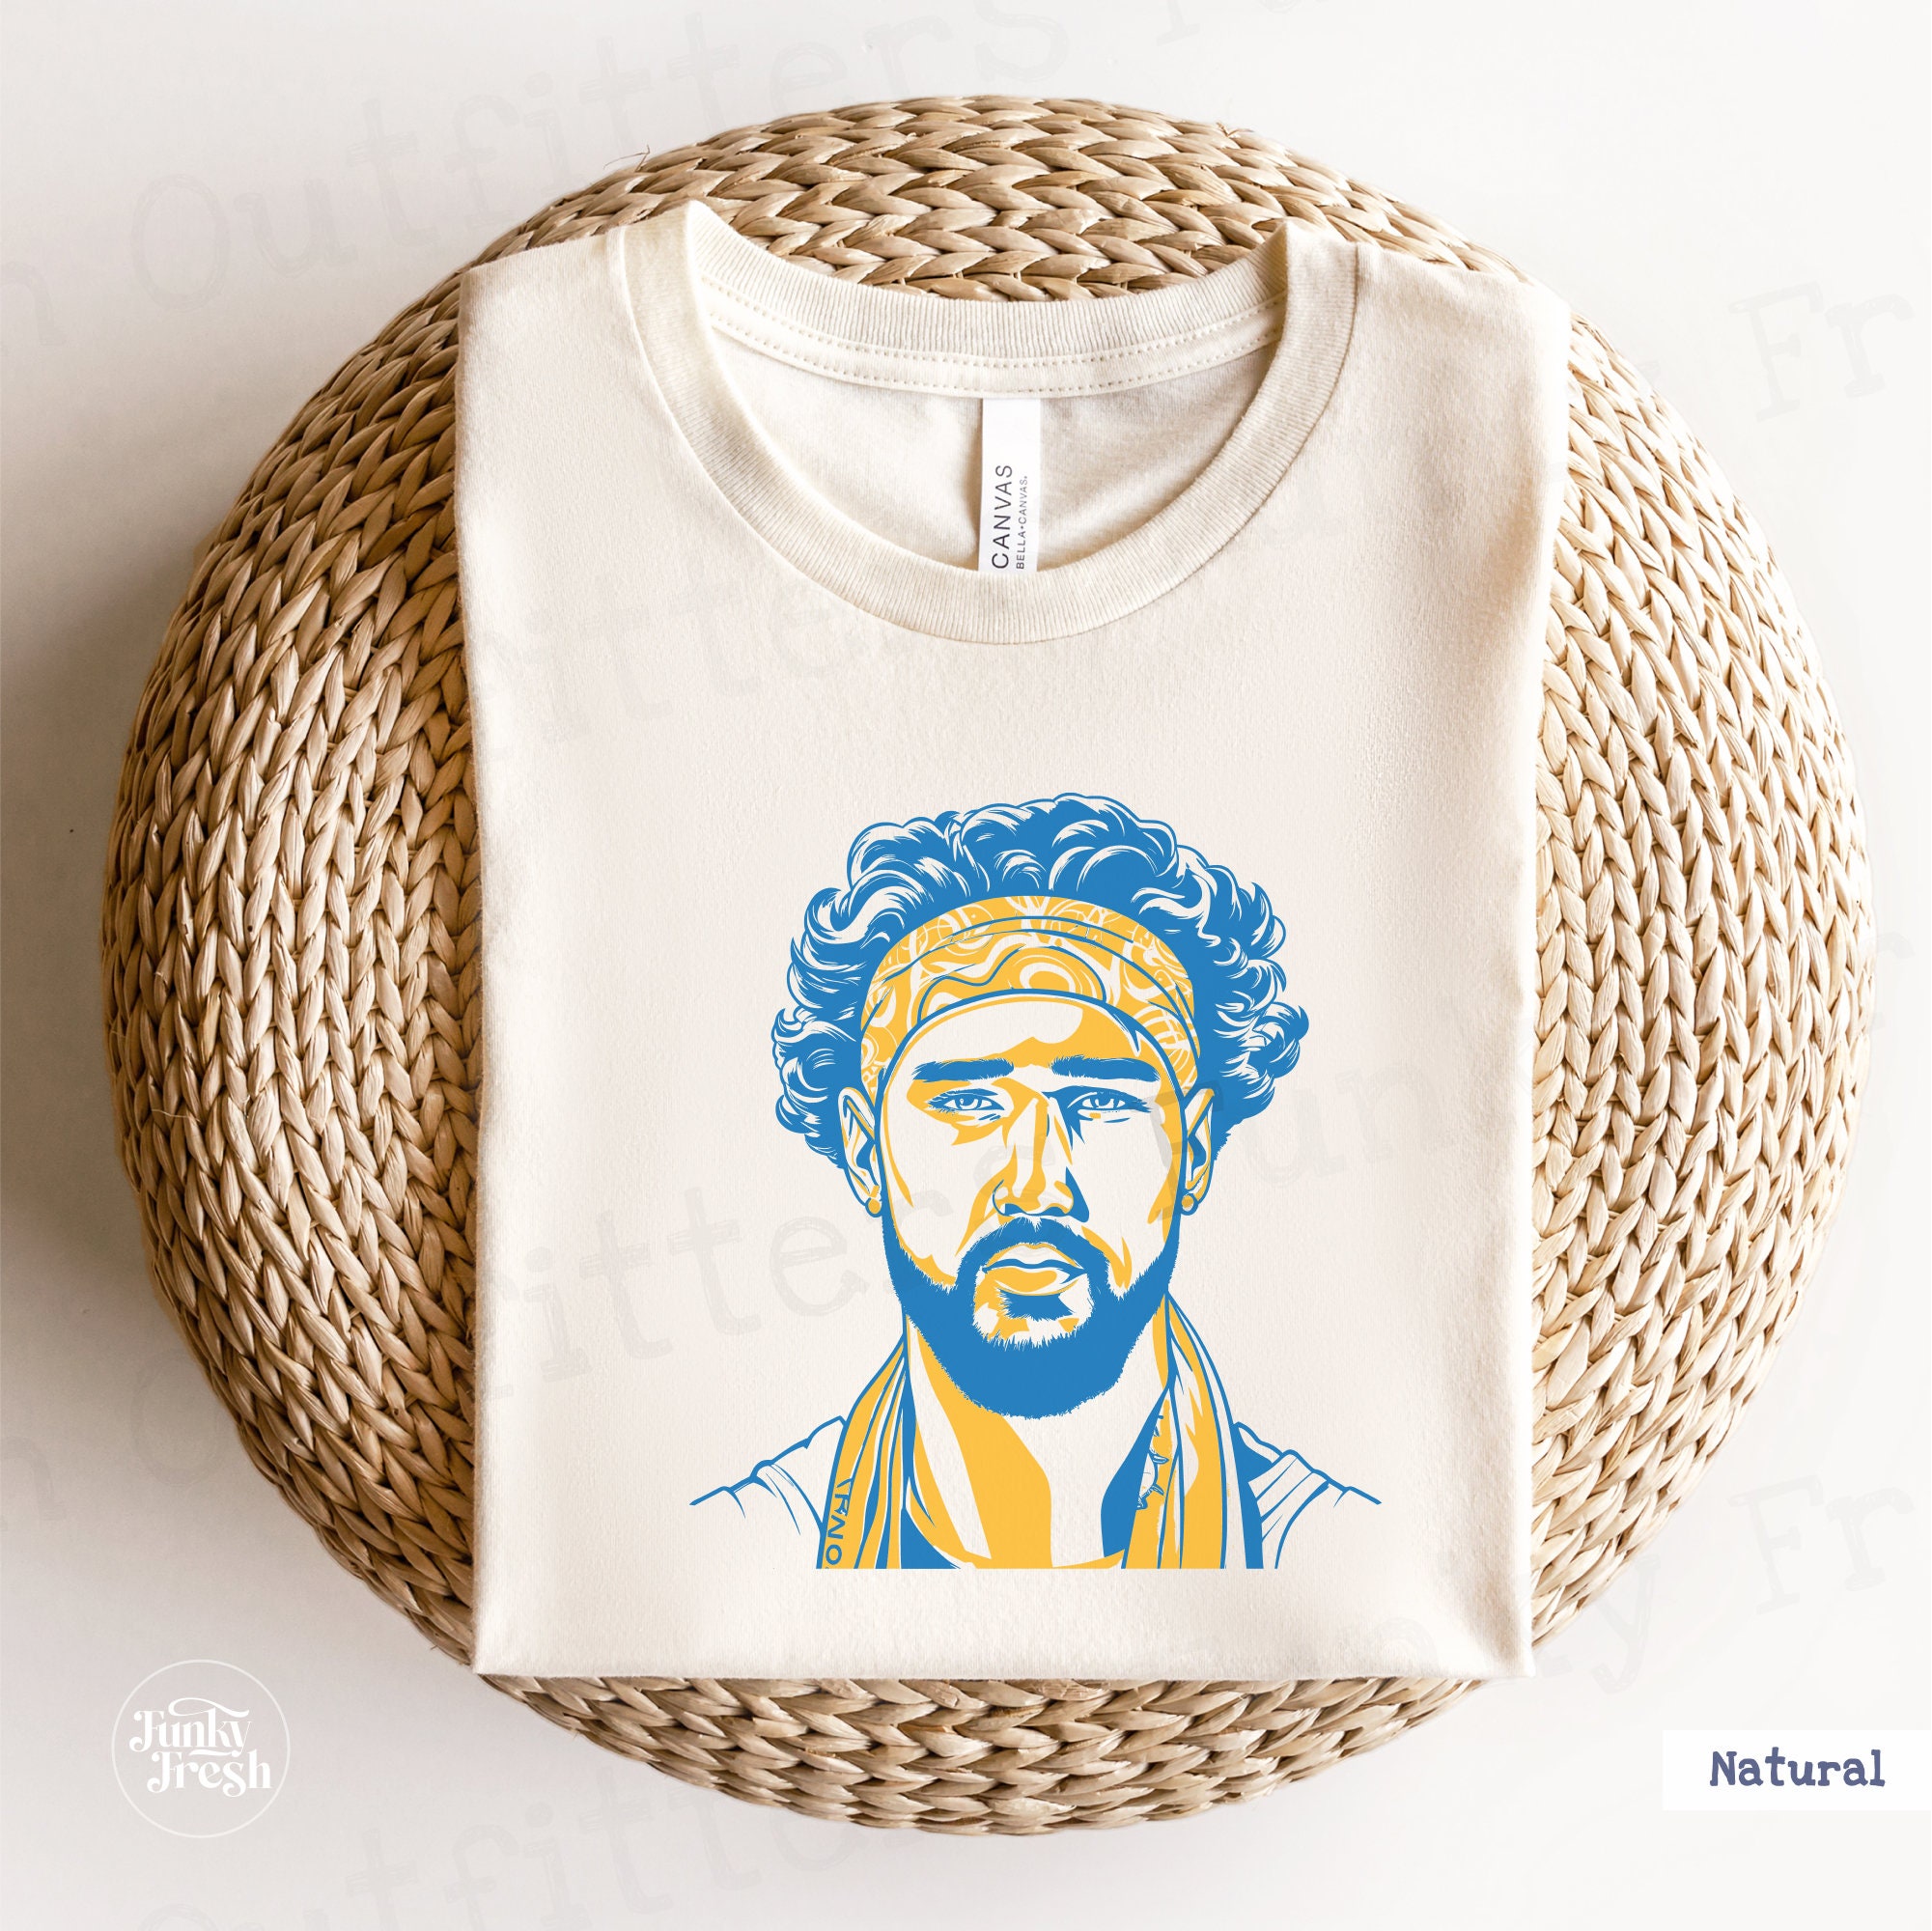 Gousclothing - Official Klay Thompson Holy Cannoli Shirt by Store